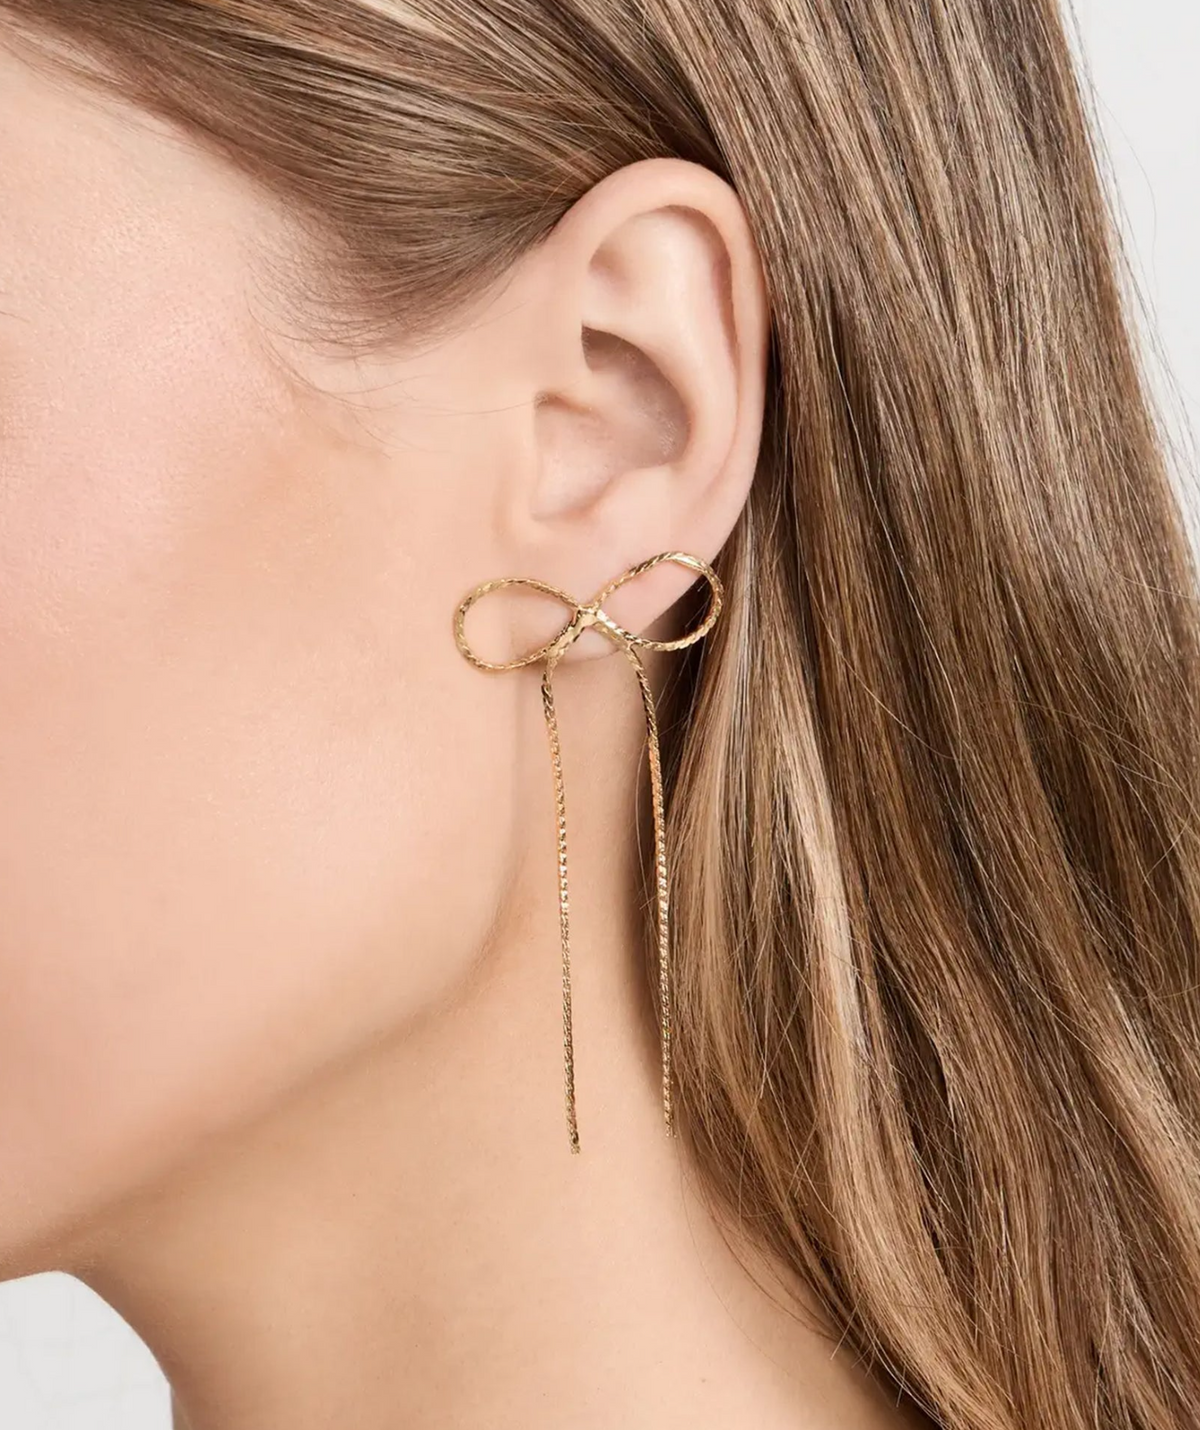 Shashi Jewelry Kate Bow Earring in Gold